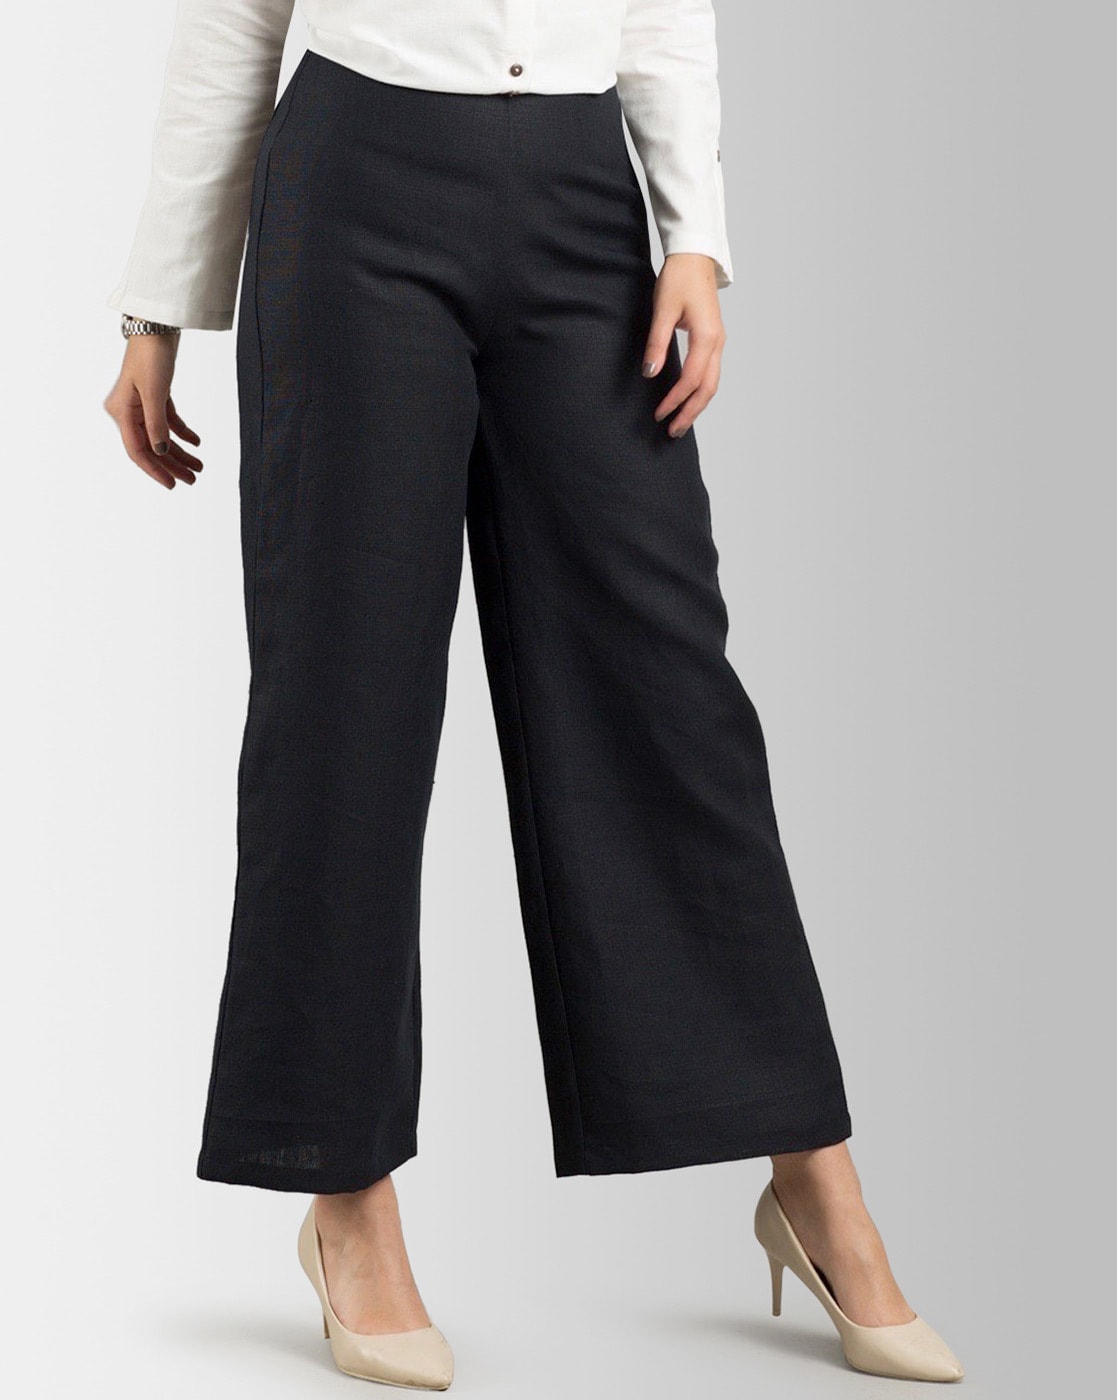 Buy Khaki Trousers & Pants for Women by Outryt Online | Ajio.com